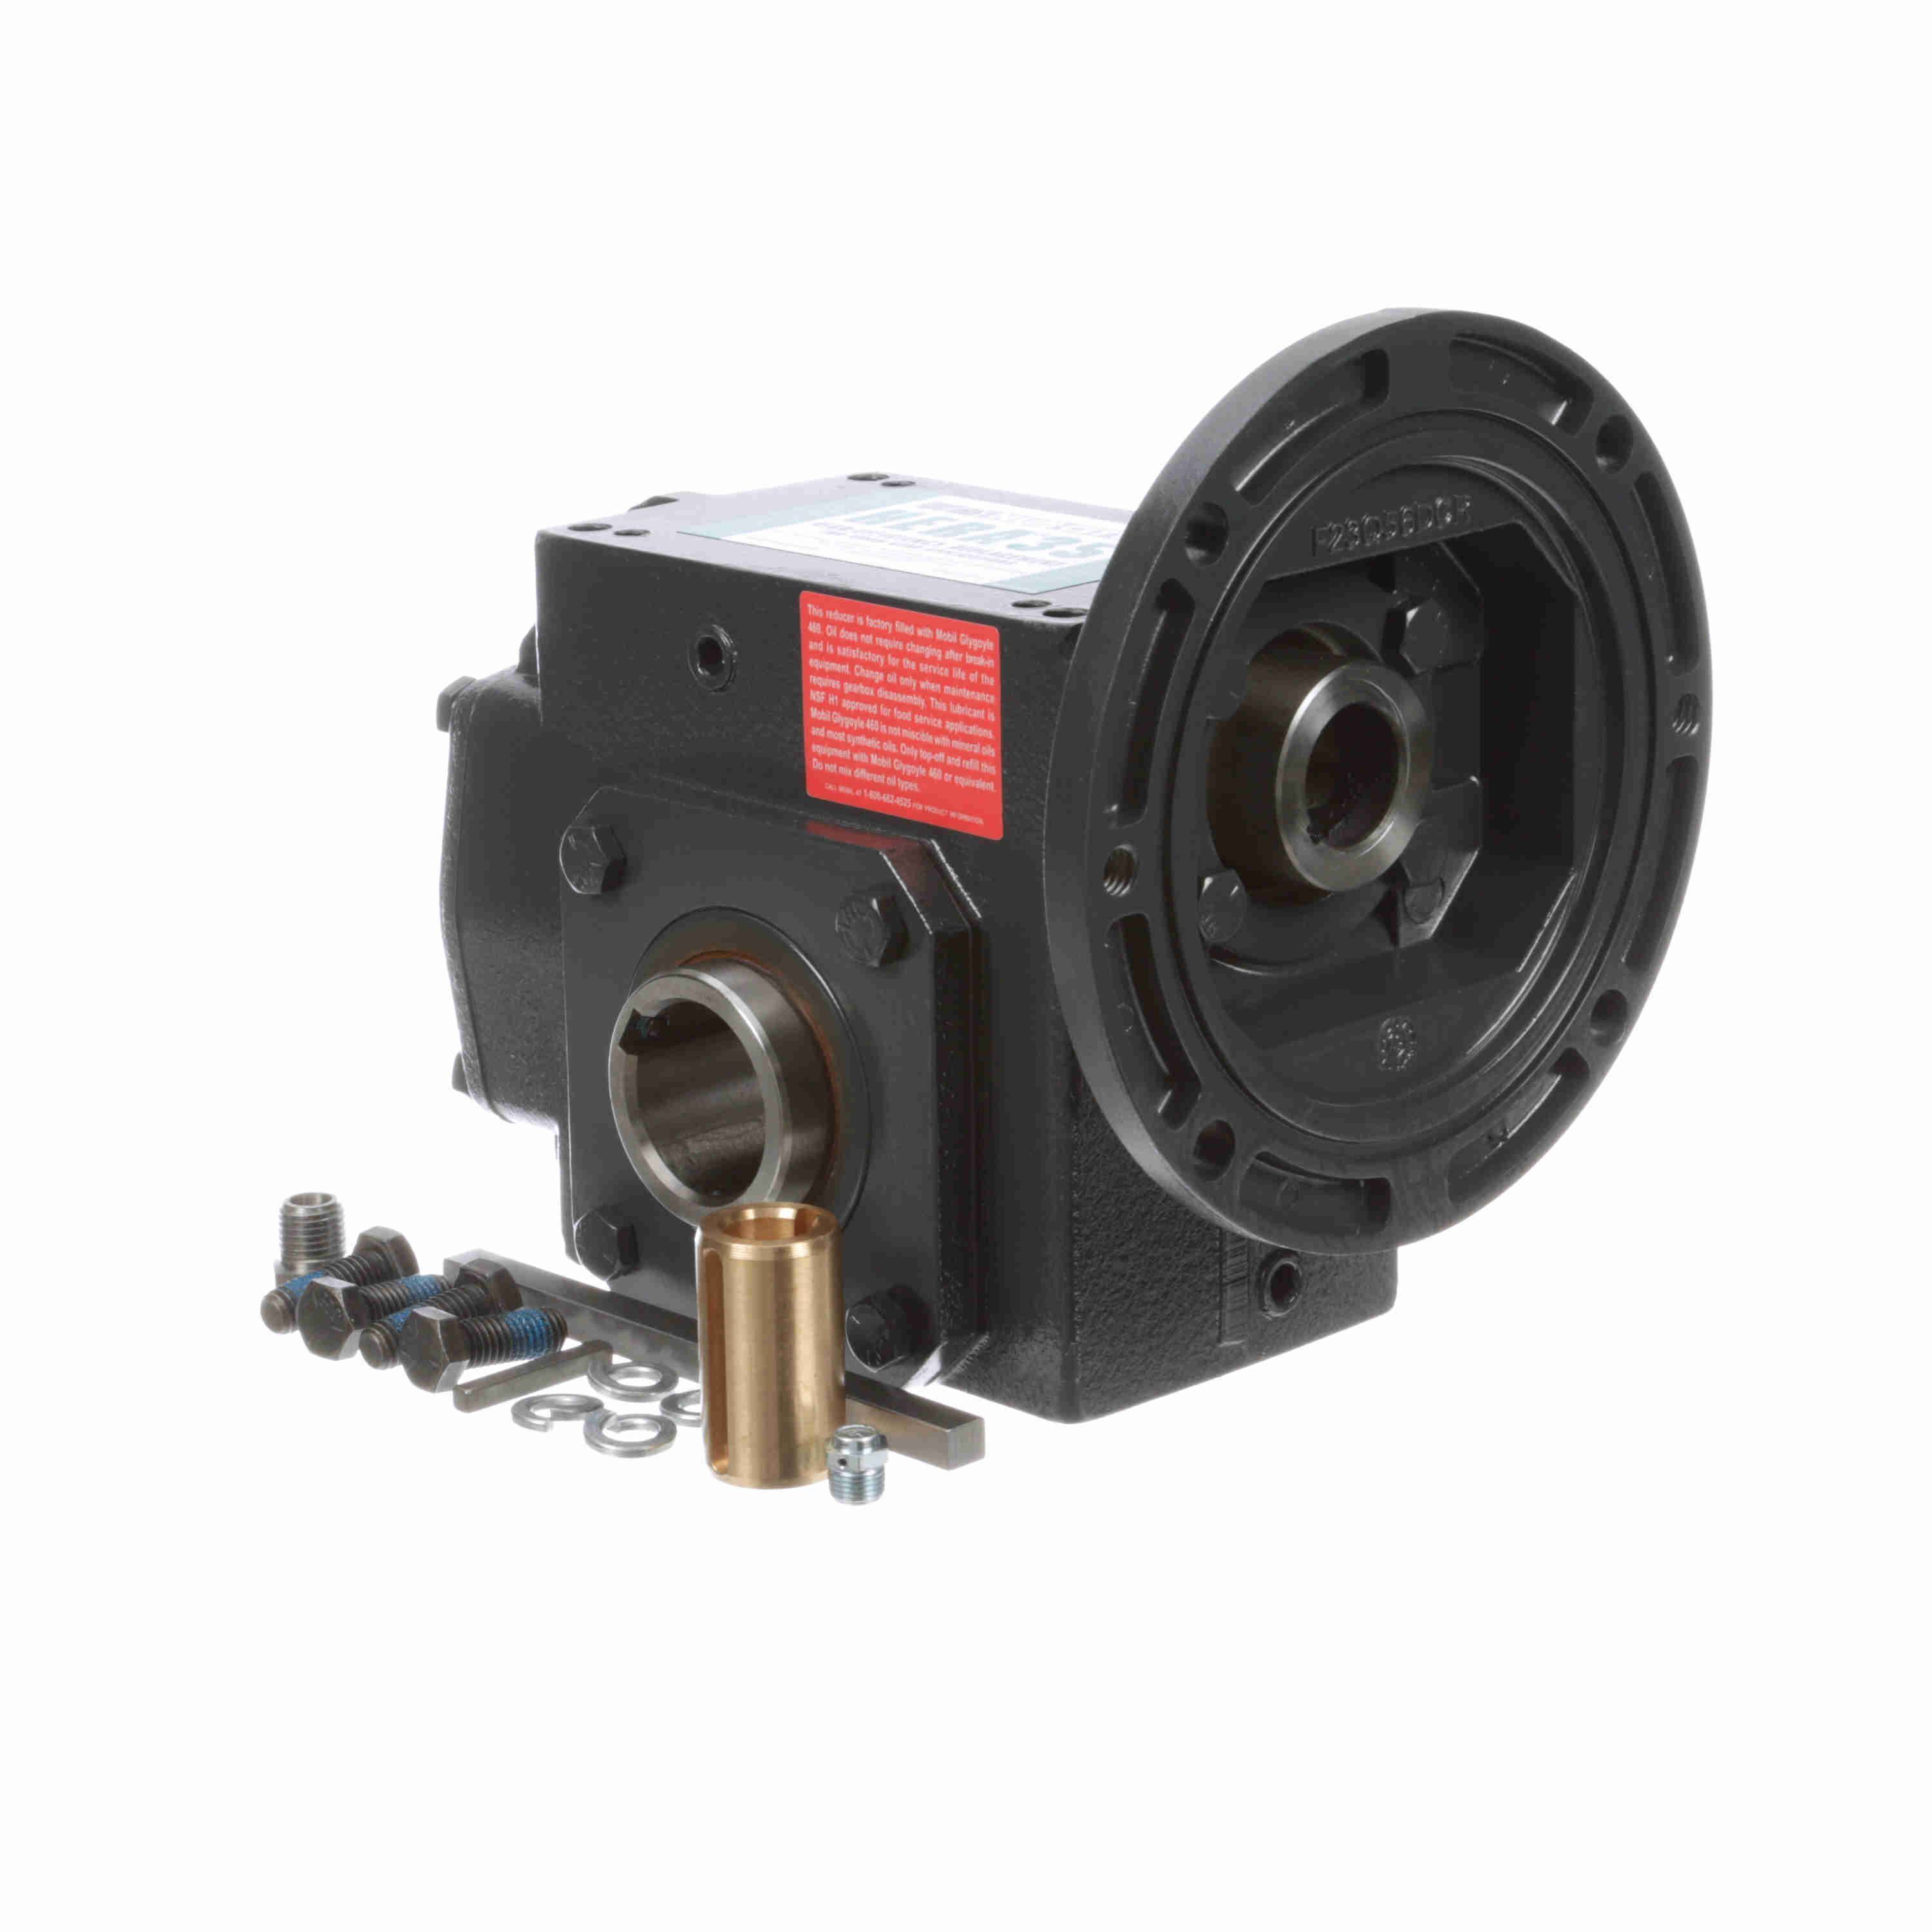 HUB CITY Speed Reducers and Gear Drives